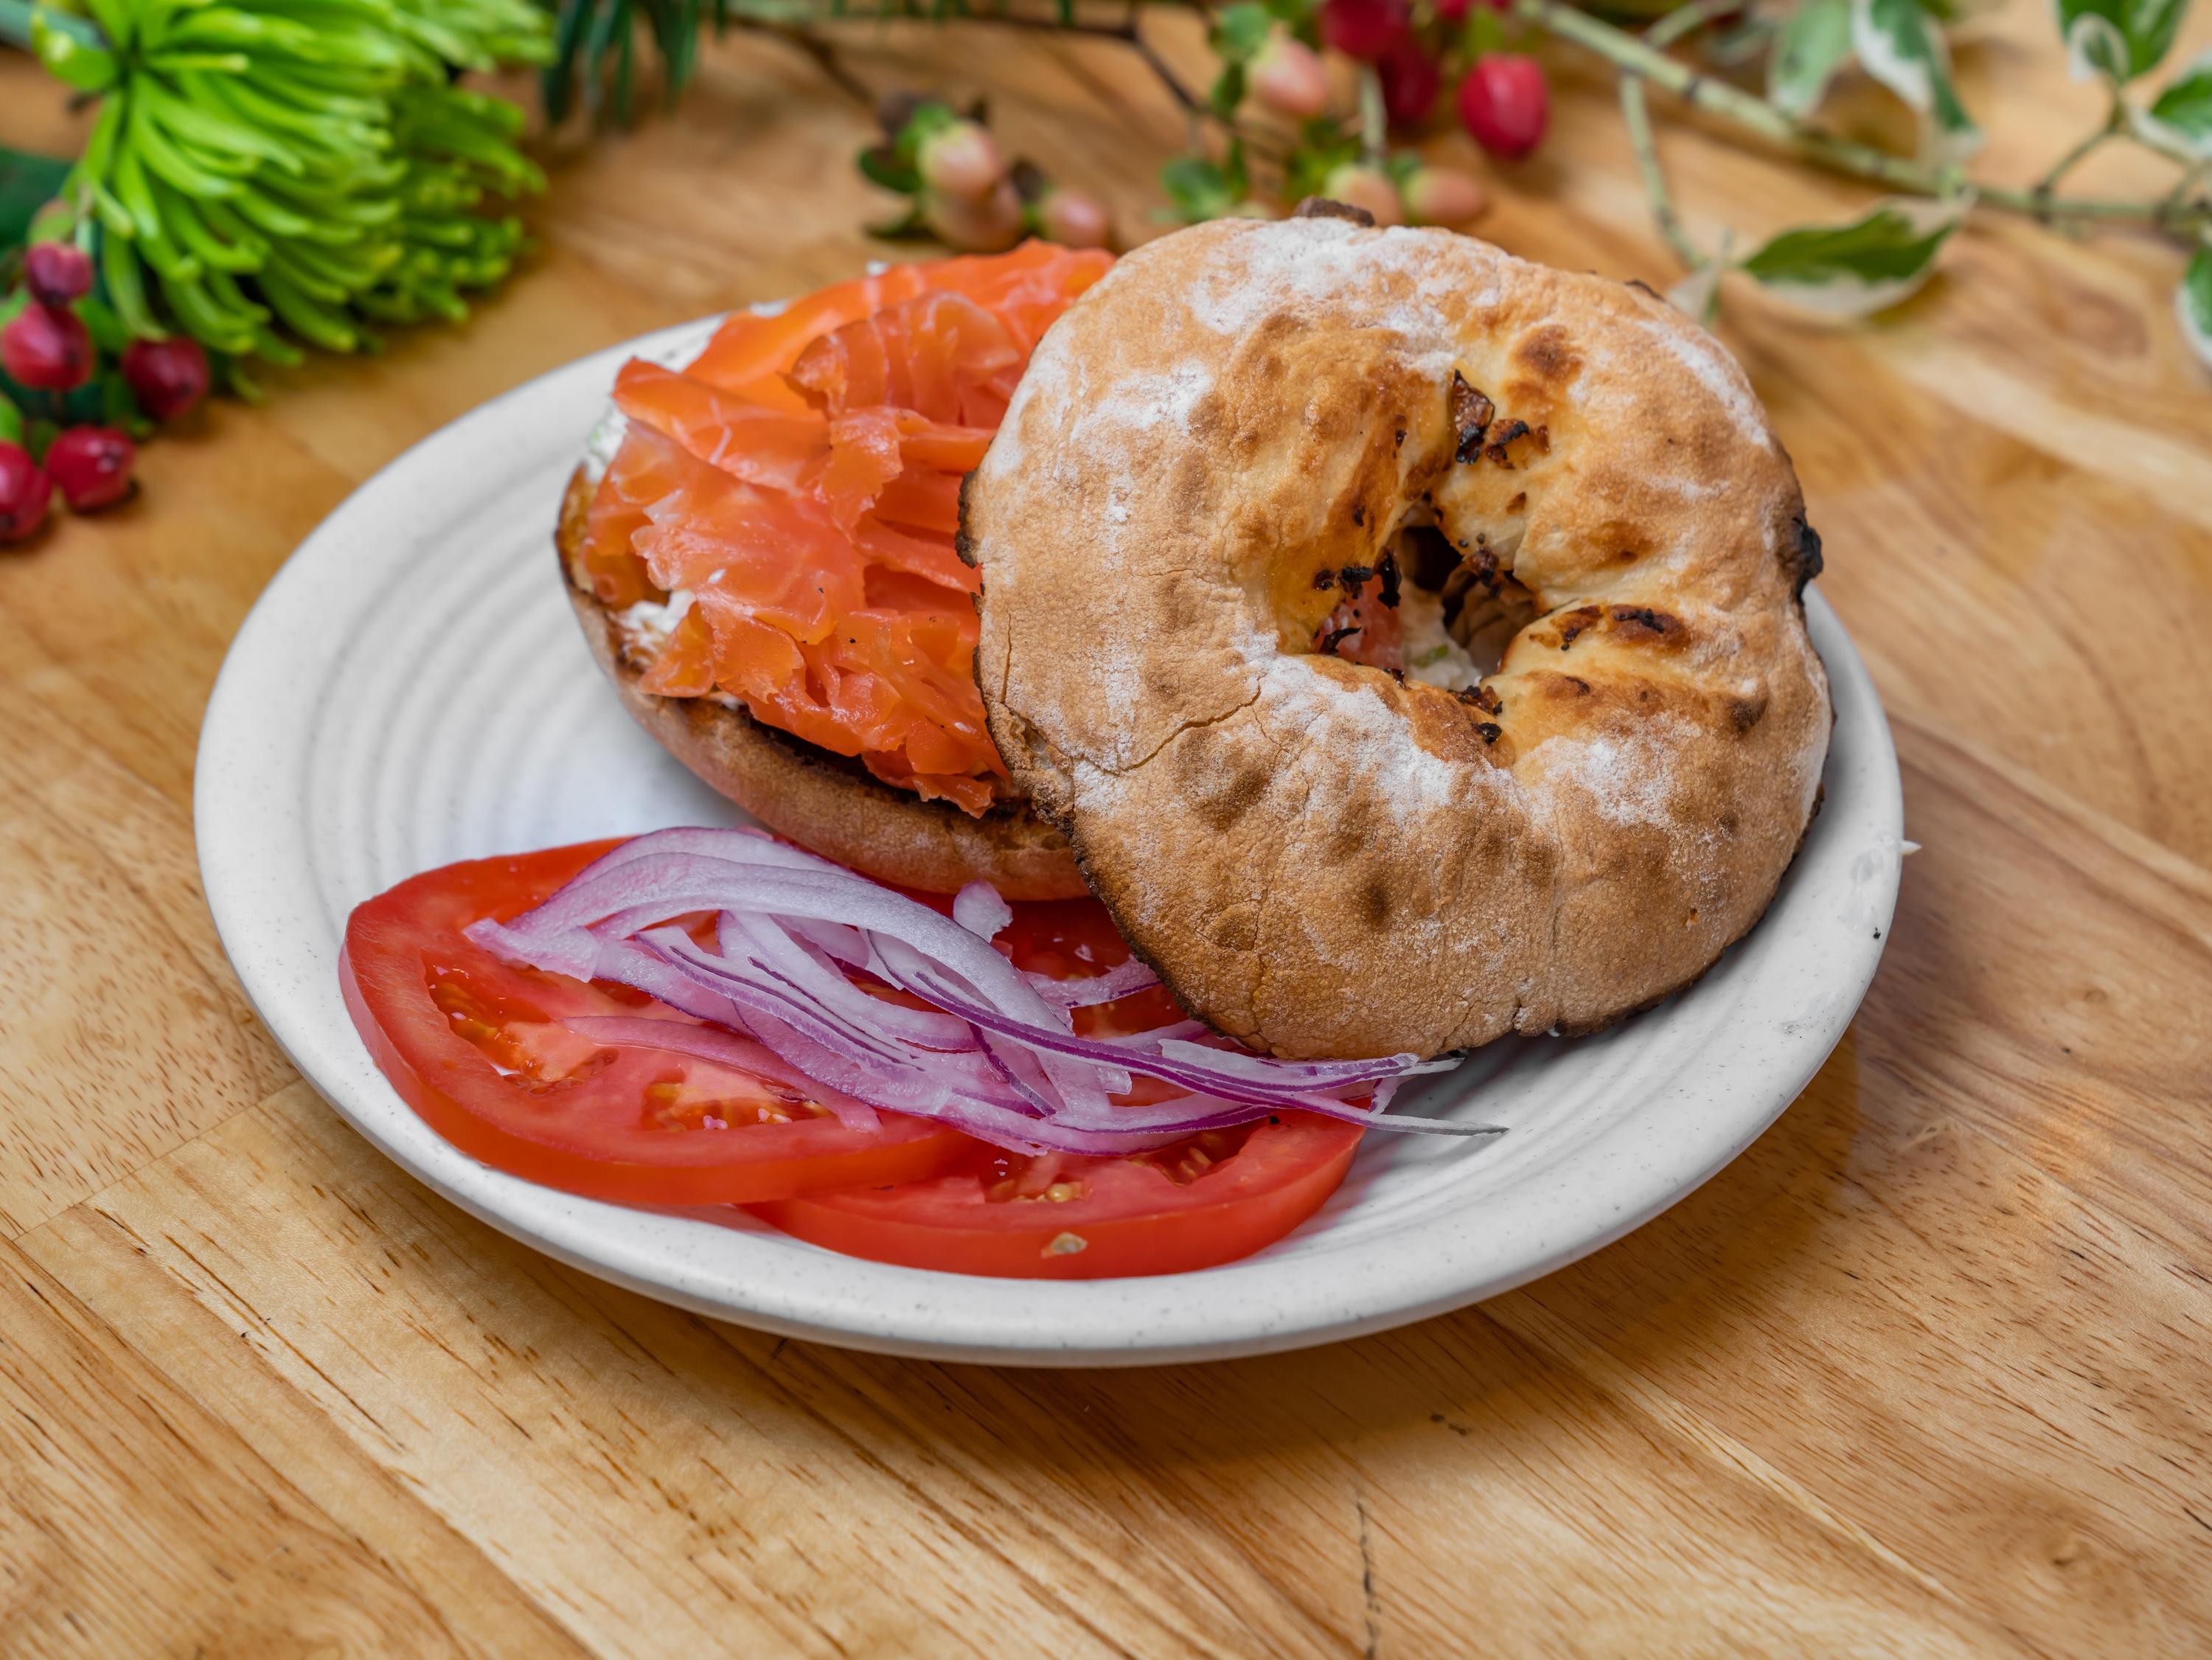 Bialy & Lox